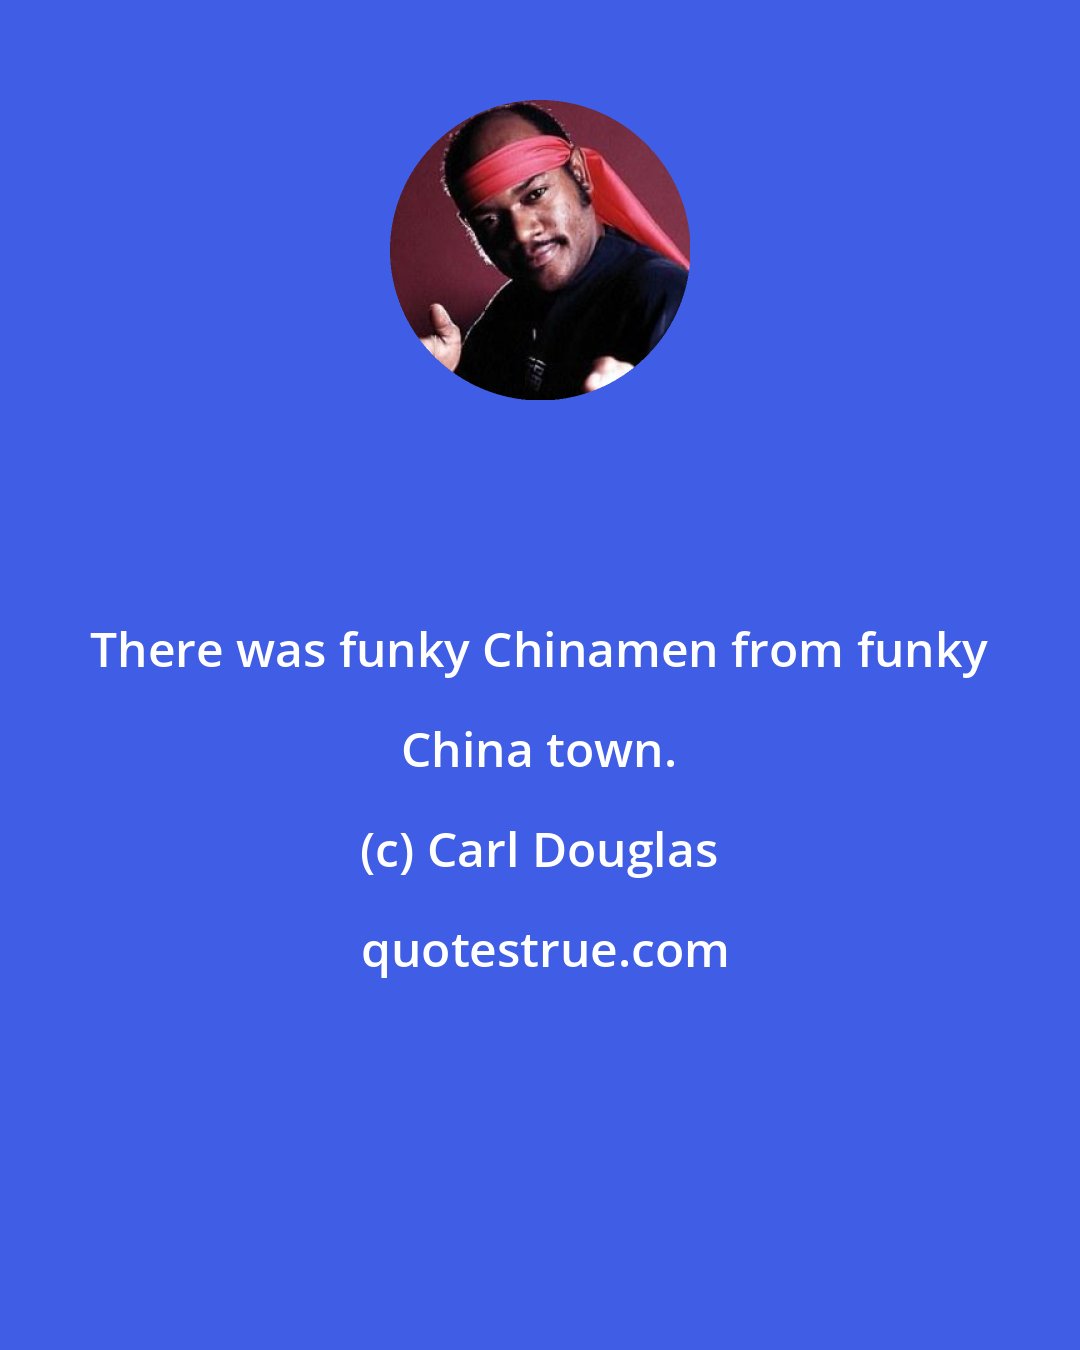 Carl Douglas: There was funky Chinamen from funky China town.